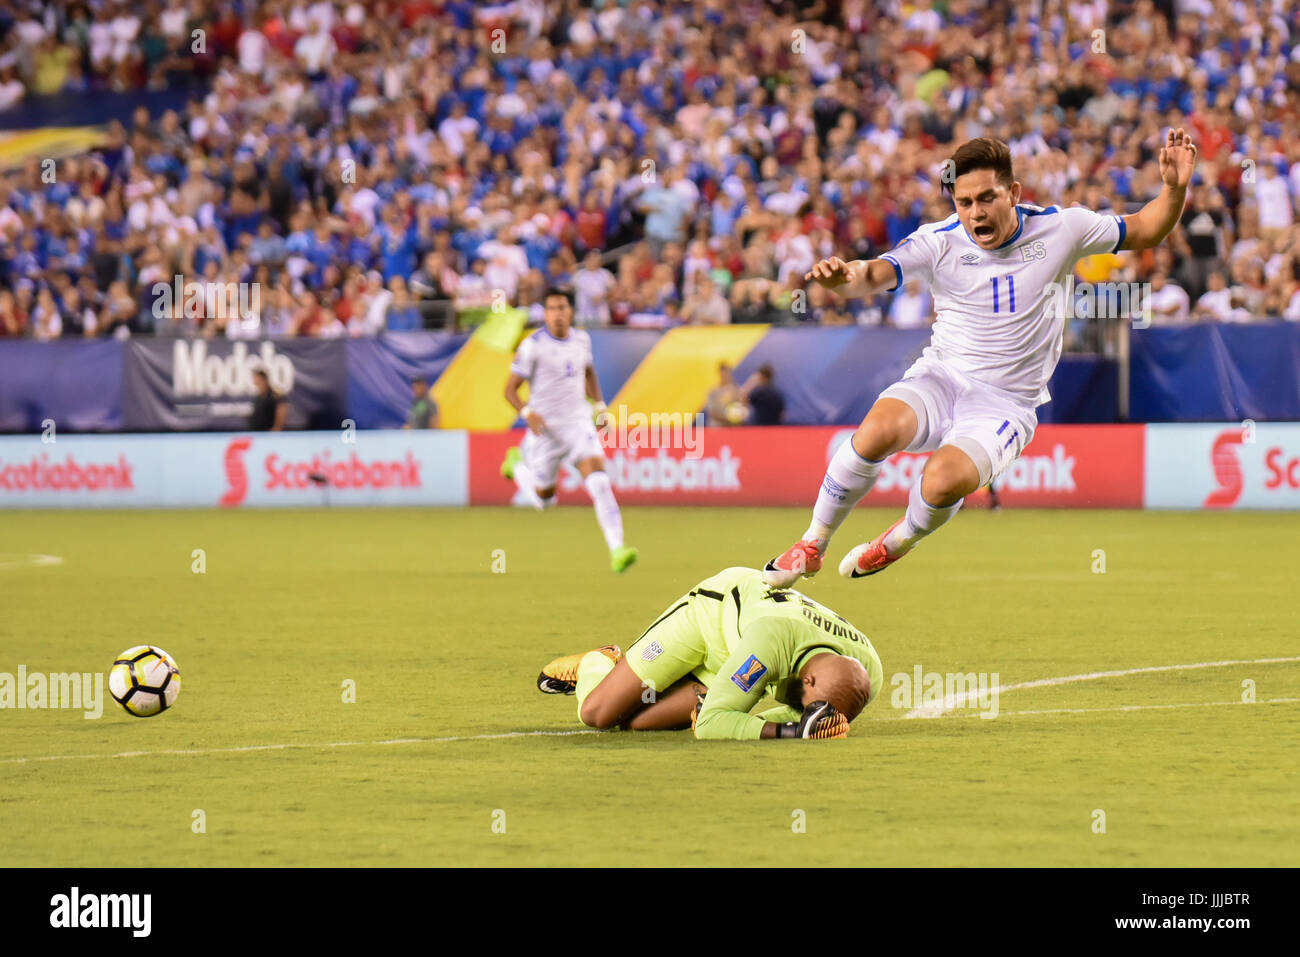 Tim Howard goalkeeper of the USMNT United States Mens National Team makes an incredible goalie save on Rodolfo Zelaya and nearly avoids a collision during a soccer | football match against El Salvador as part of the CONCACAF Gold Cup Stock Photo